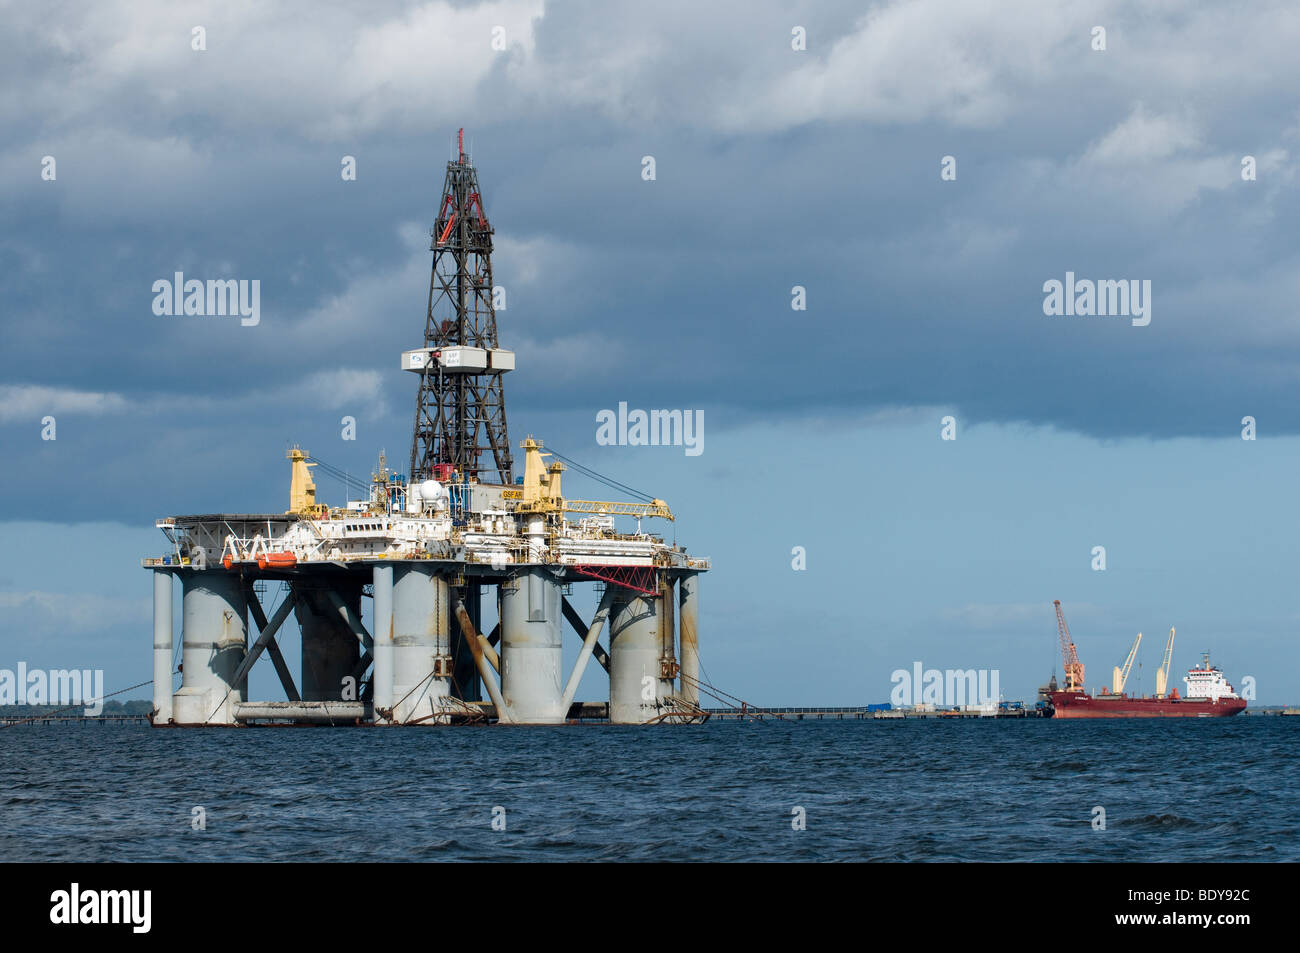 Oil Rig platforms in the Cromarty Firth near Invergordon Stock Photo